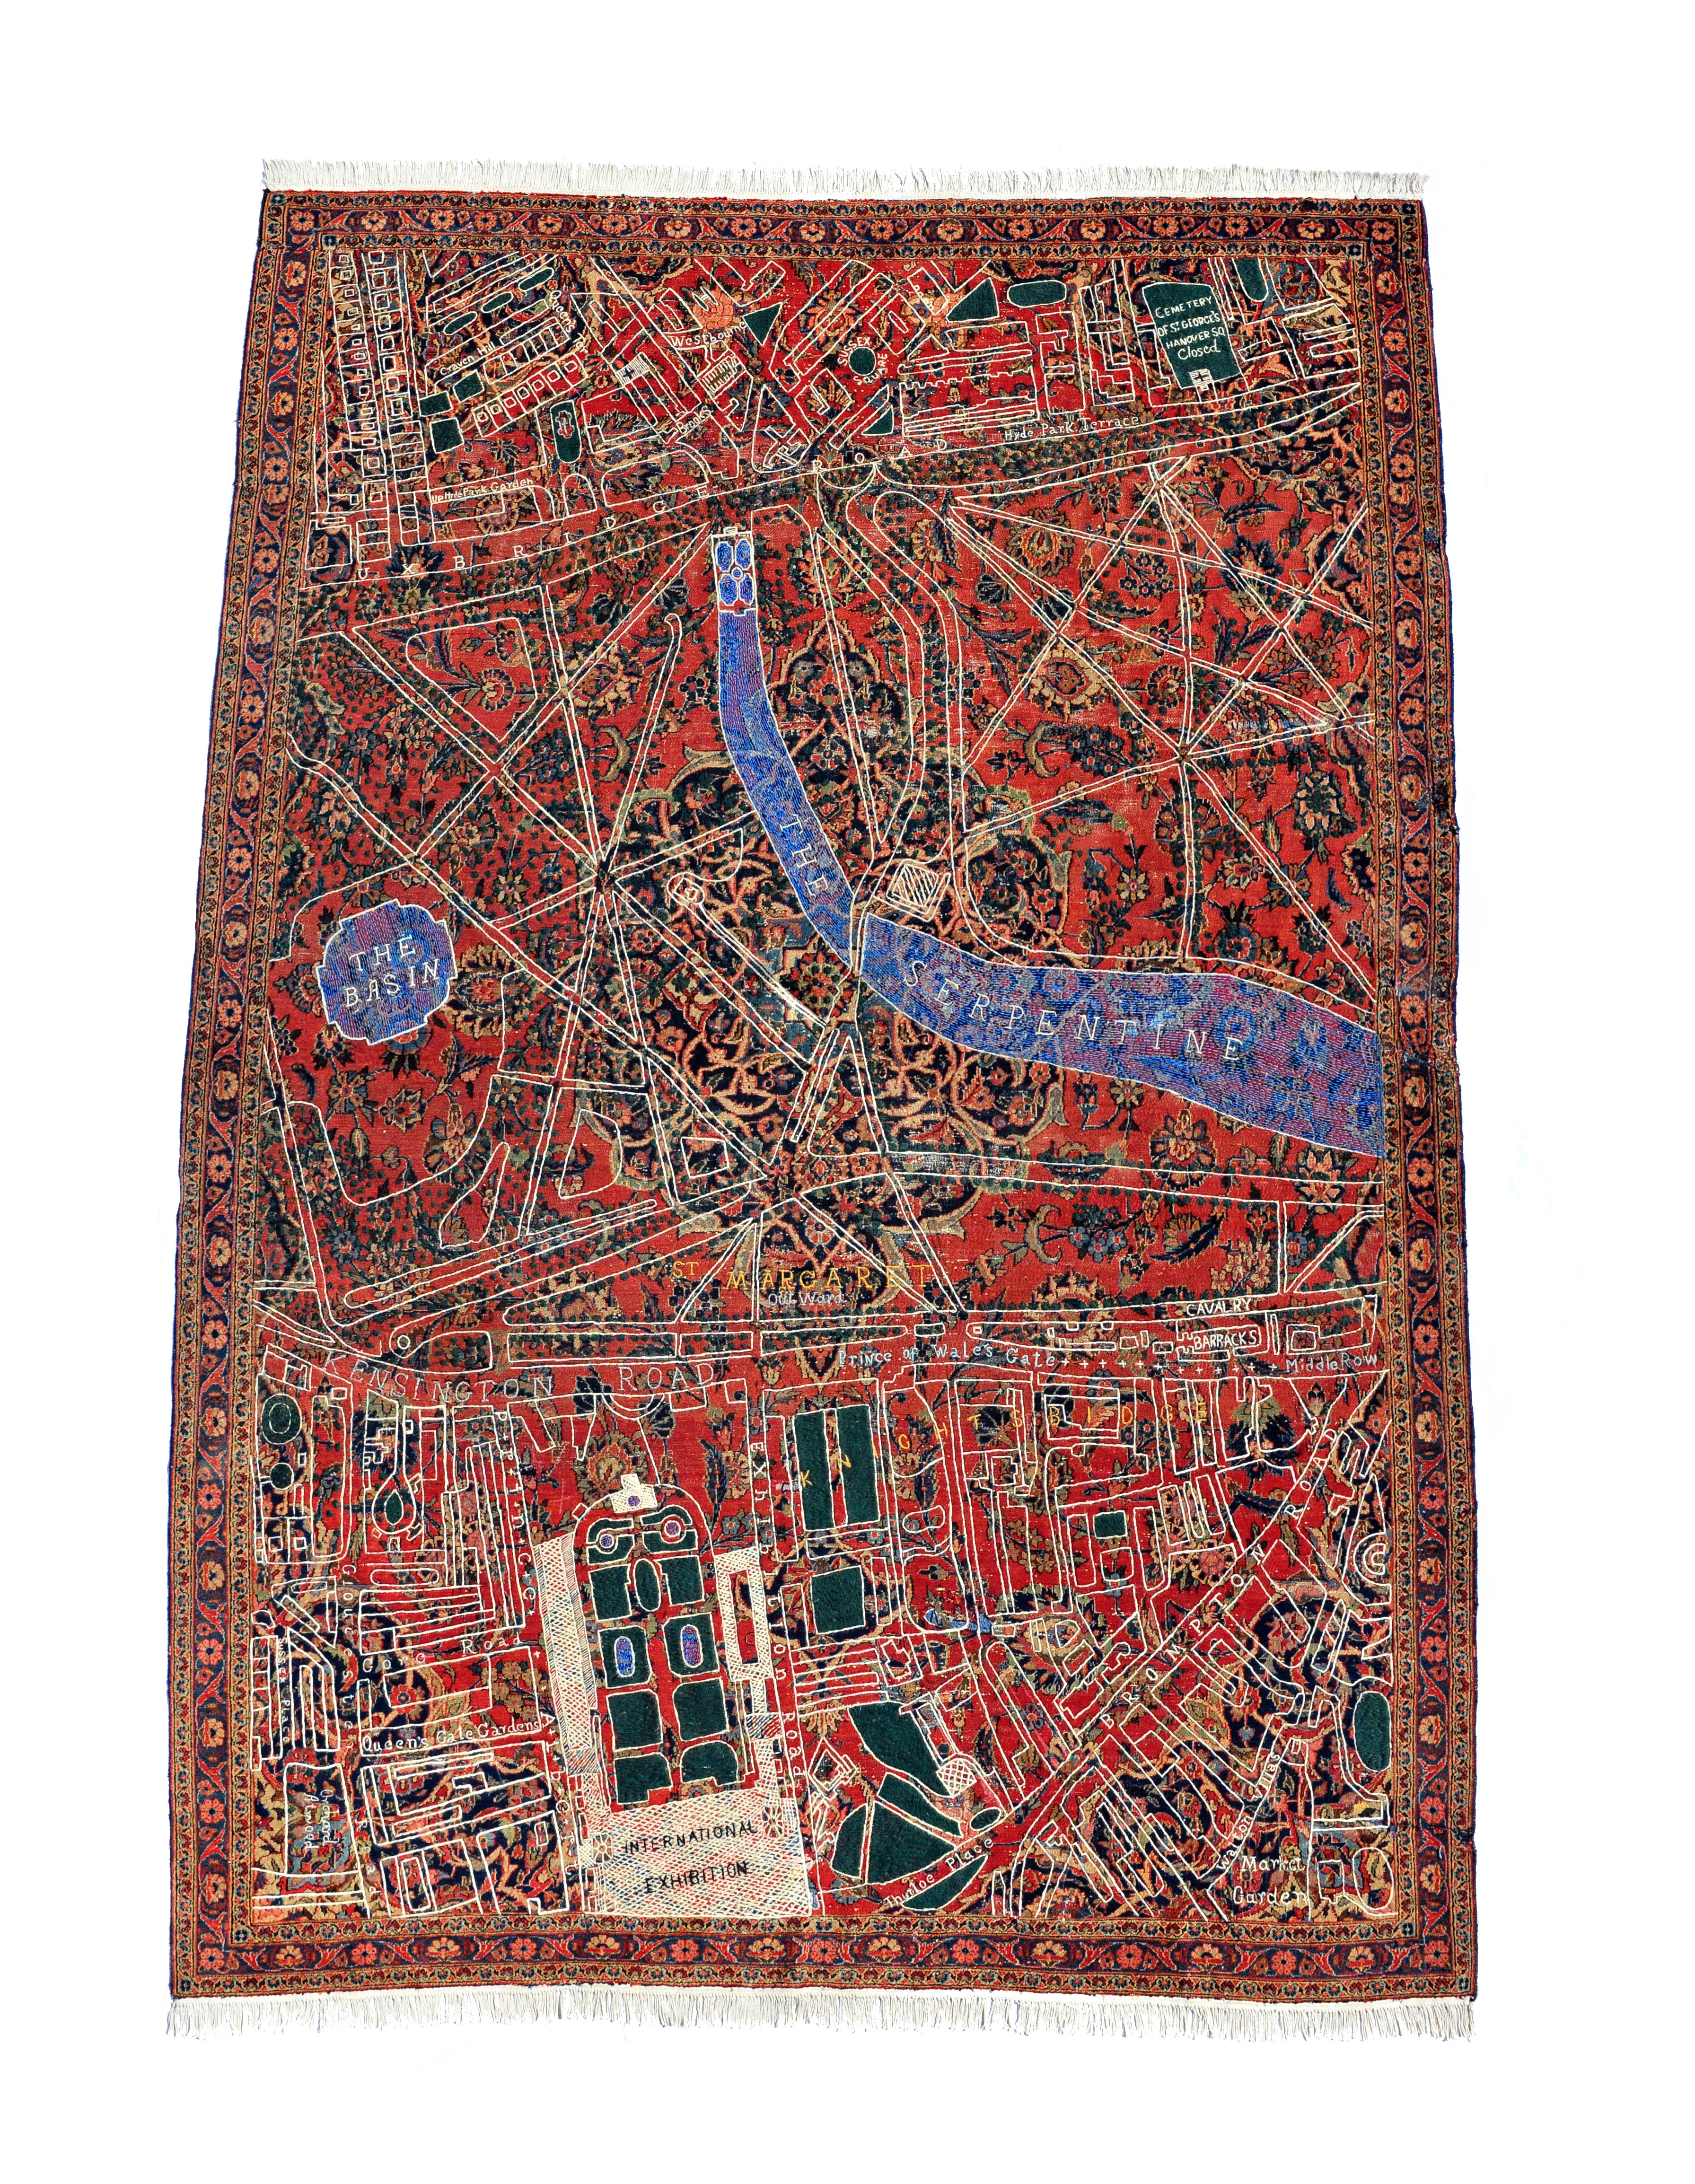 2011, hand-knotted carpet with dyed-wool embroidery, 350.5 x 238.7 cm. Collection of AMA Foundation, Chile.